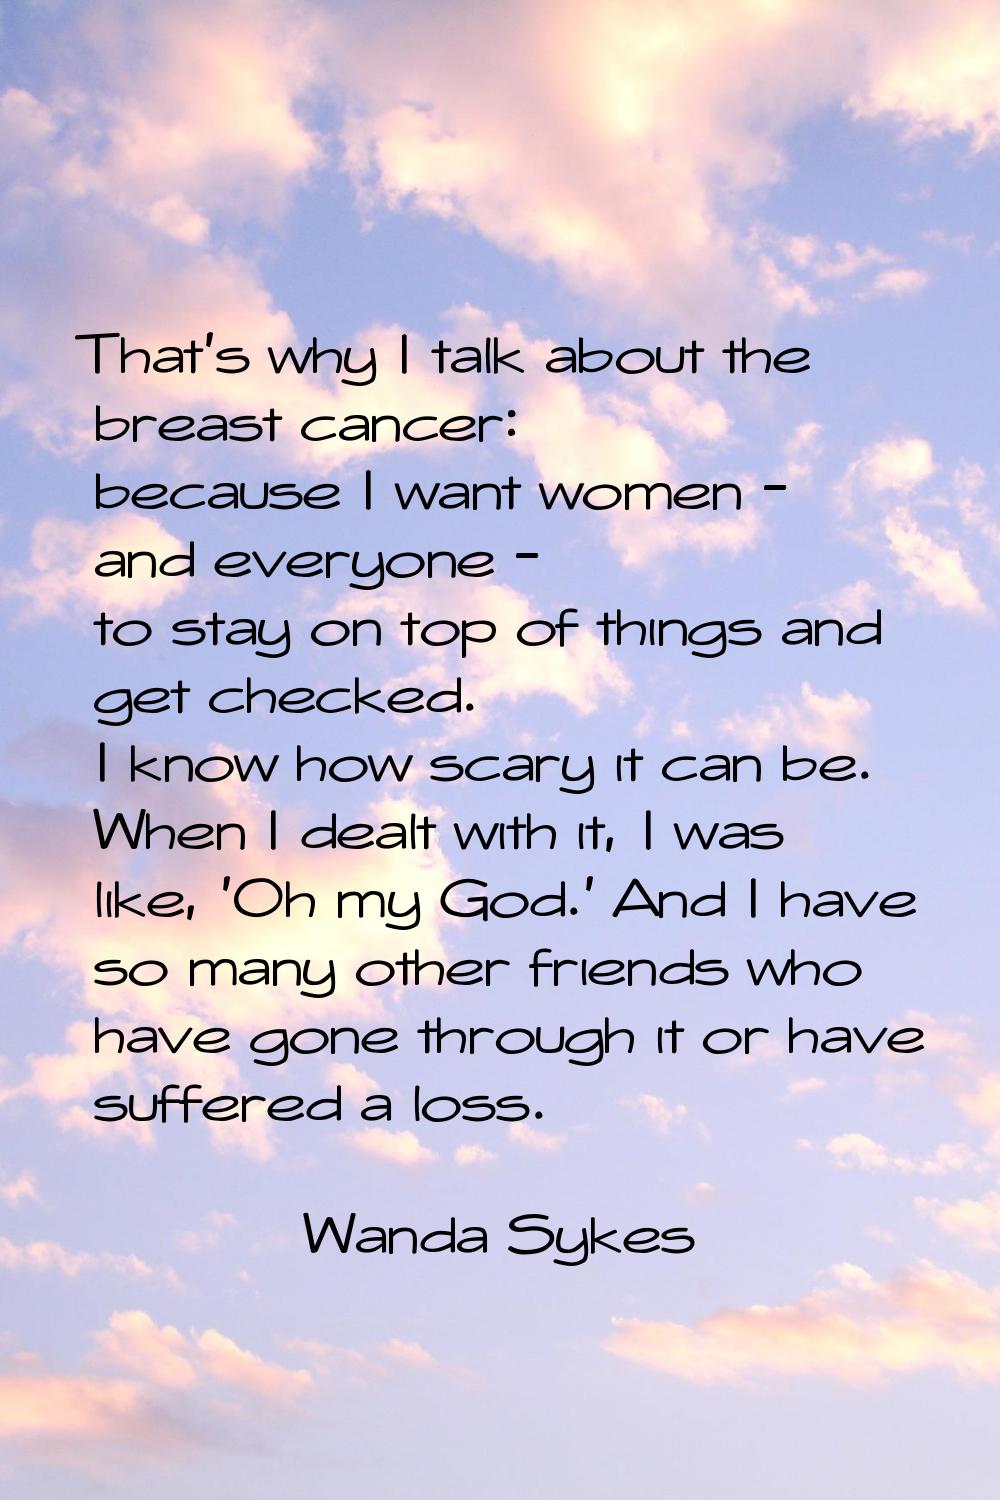 That's why I talk about the breast cancer: because I want women - and everyone - to stay on top of 